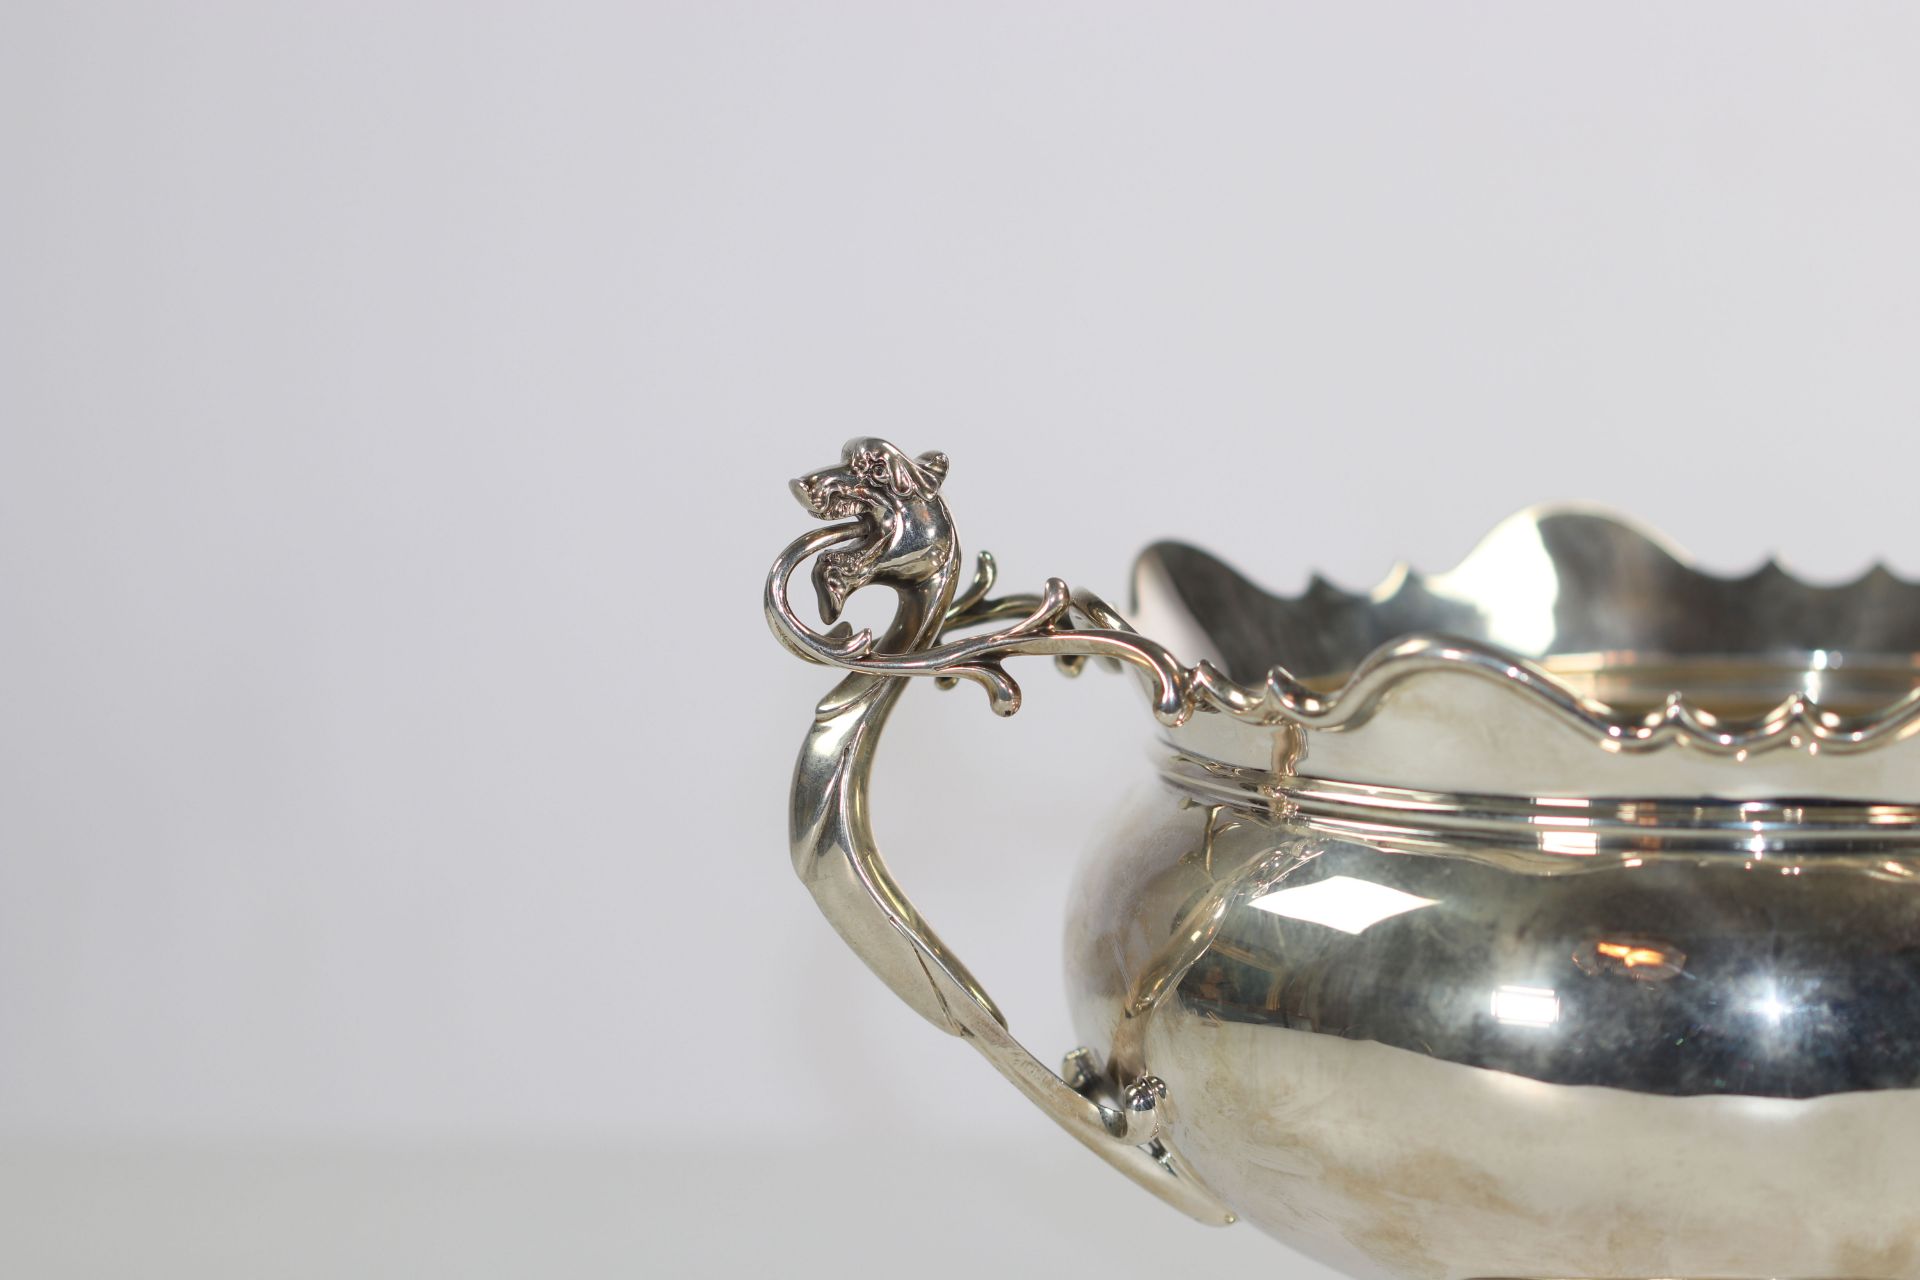 Silver cup / centerpiece, London (England) 1897 - Image 4 of 4